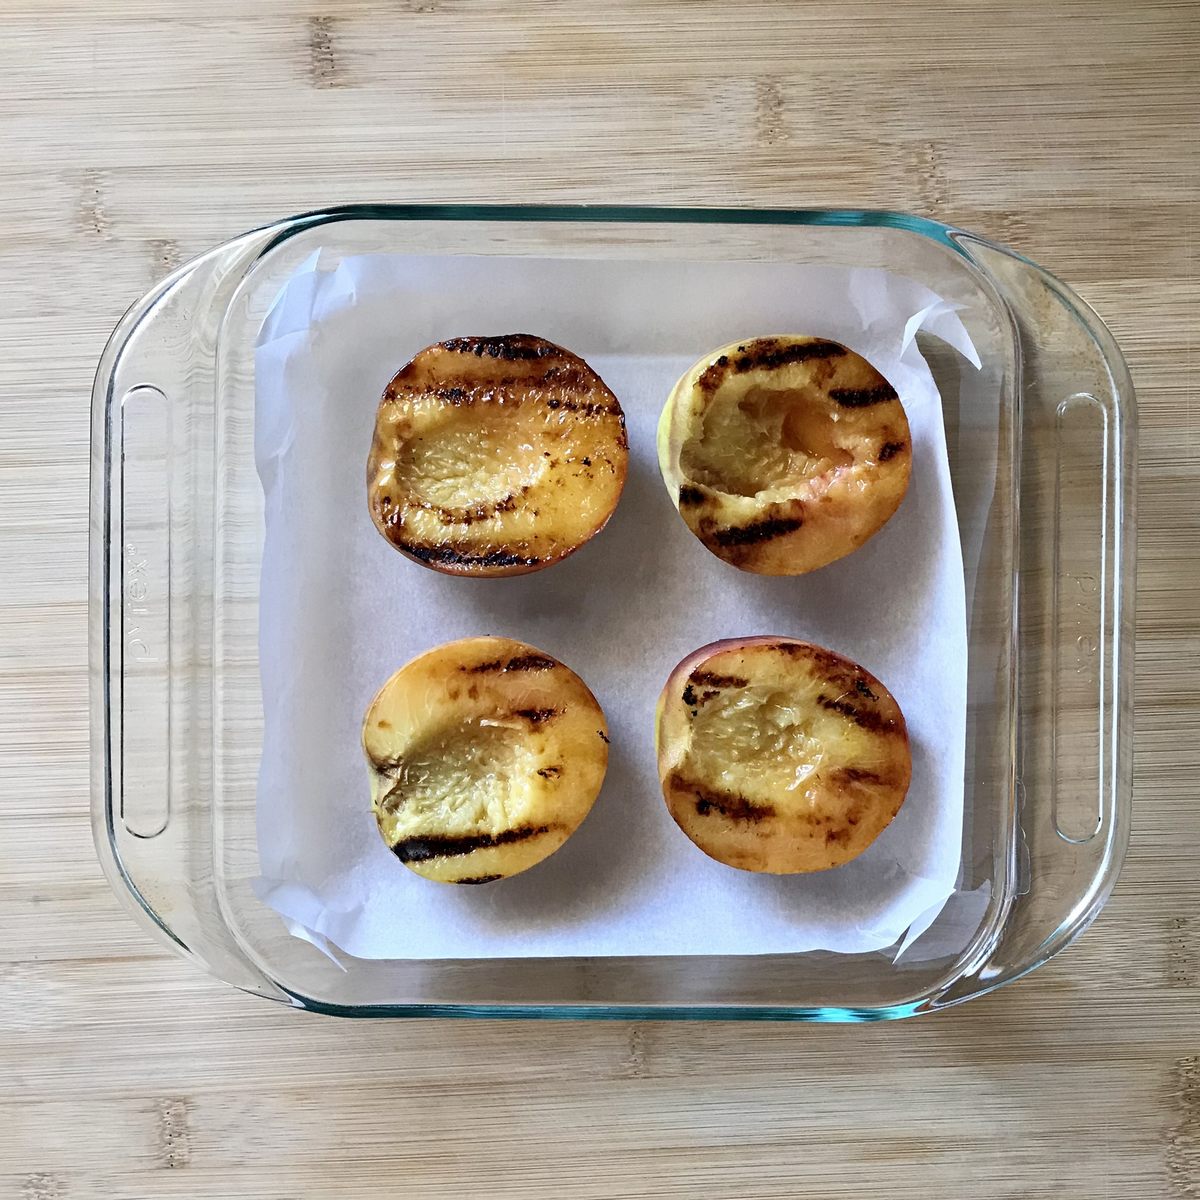 Grilled peaches in a baking dish.